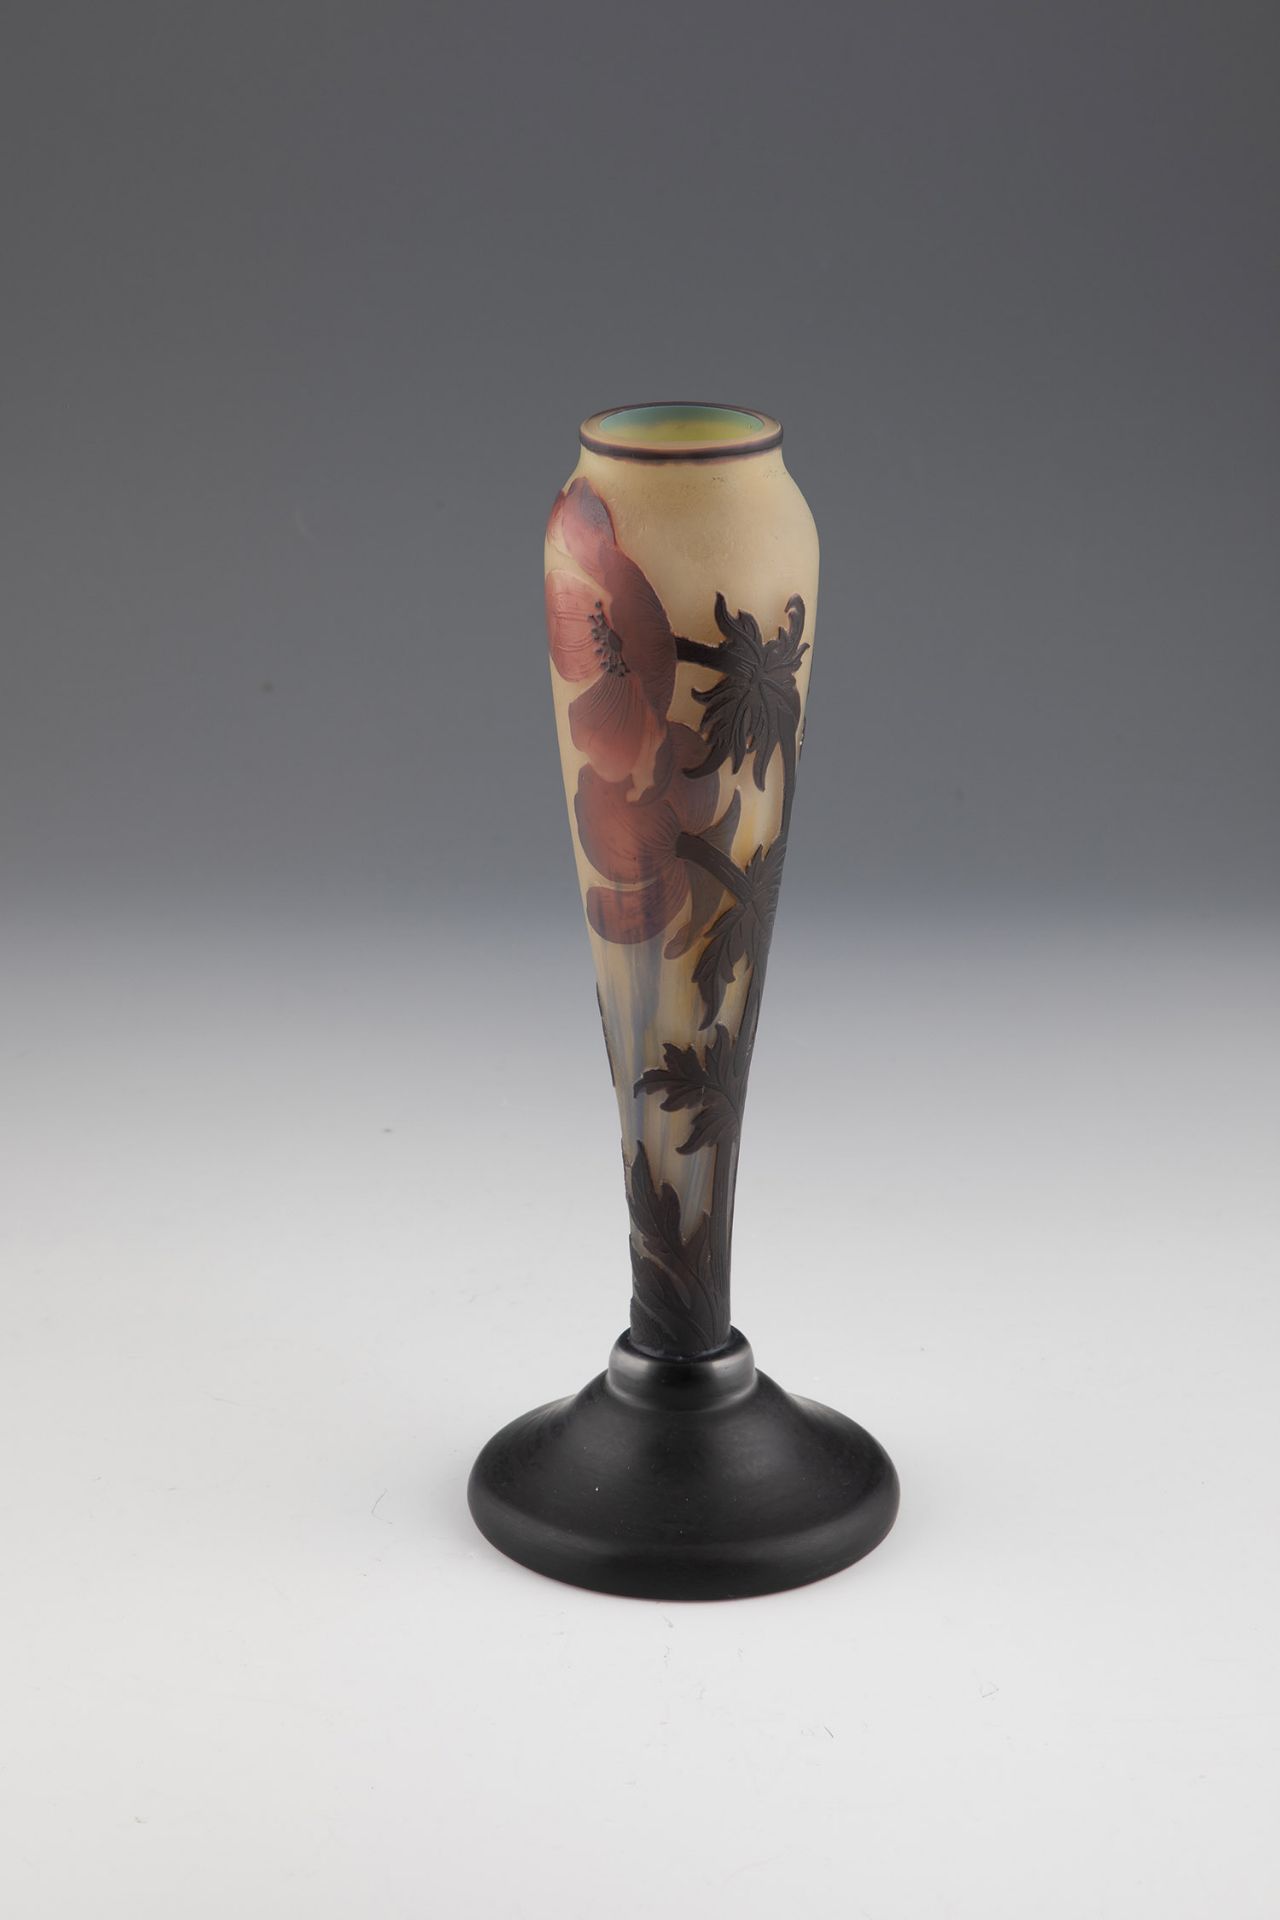 Vase with Anemone Muller FrÃ¨res, Luneville, circa 1920 Colourless glass with powder melting in